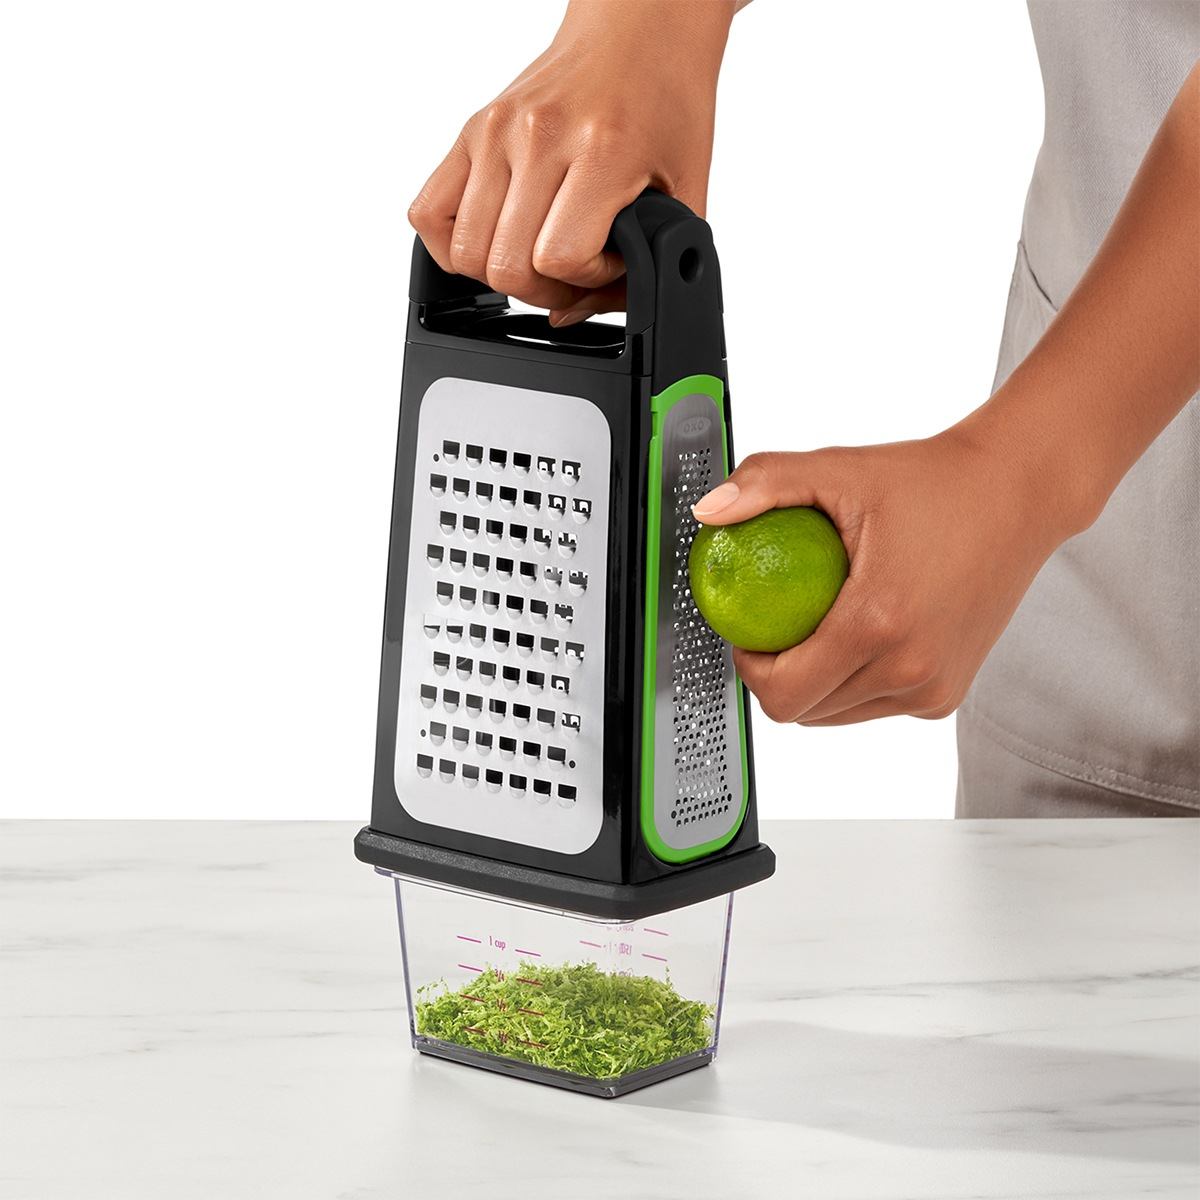 https://3fa-media.com/oxo/oxo-good-grips-grater-with-container-and-zester__102048_d1c42f6-s2500x2500.jpg